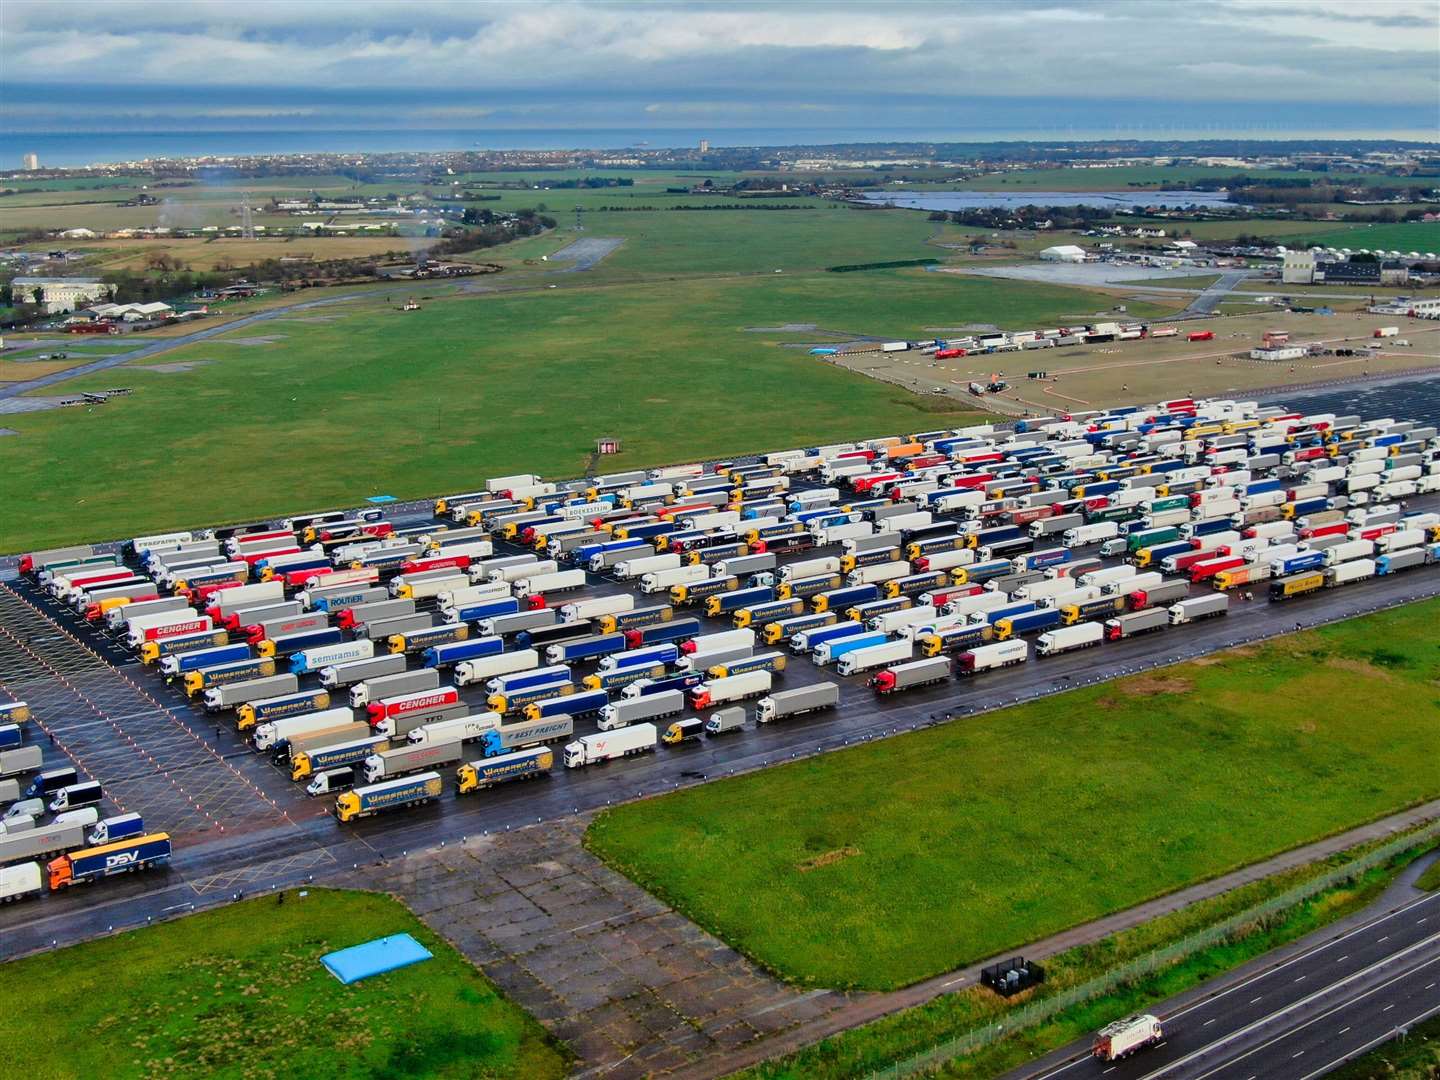 The huge number of lorries parked up at the former Manston Airport site Pic: Swift Aerial Photography